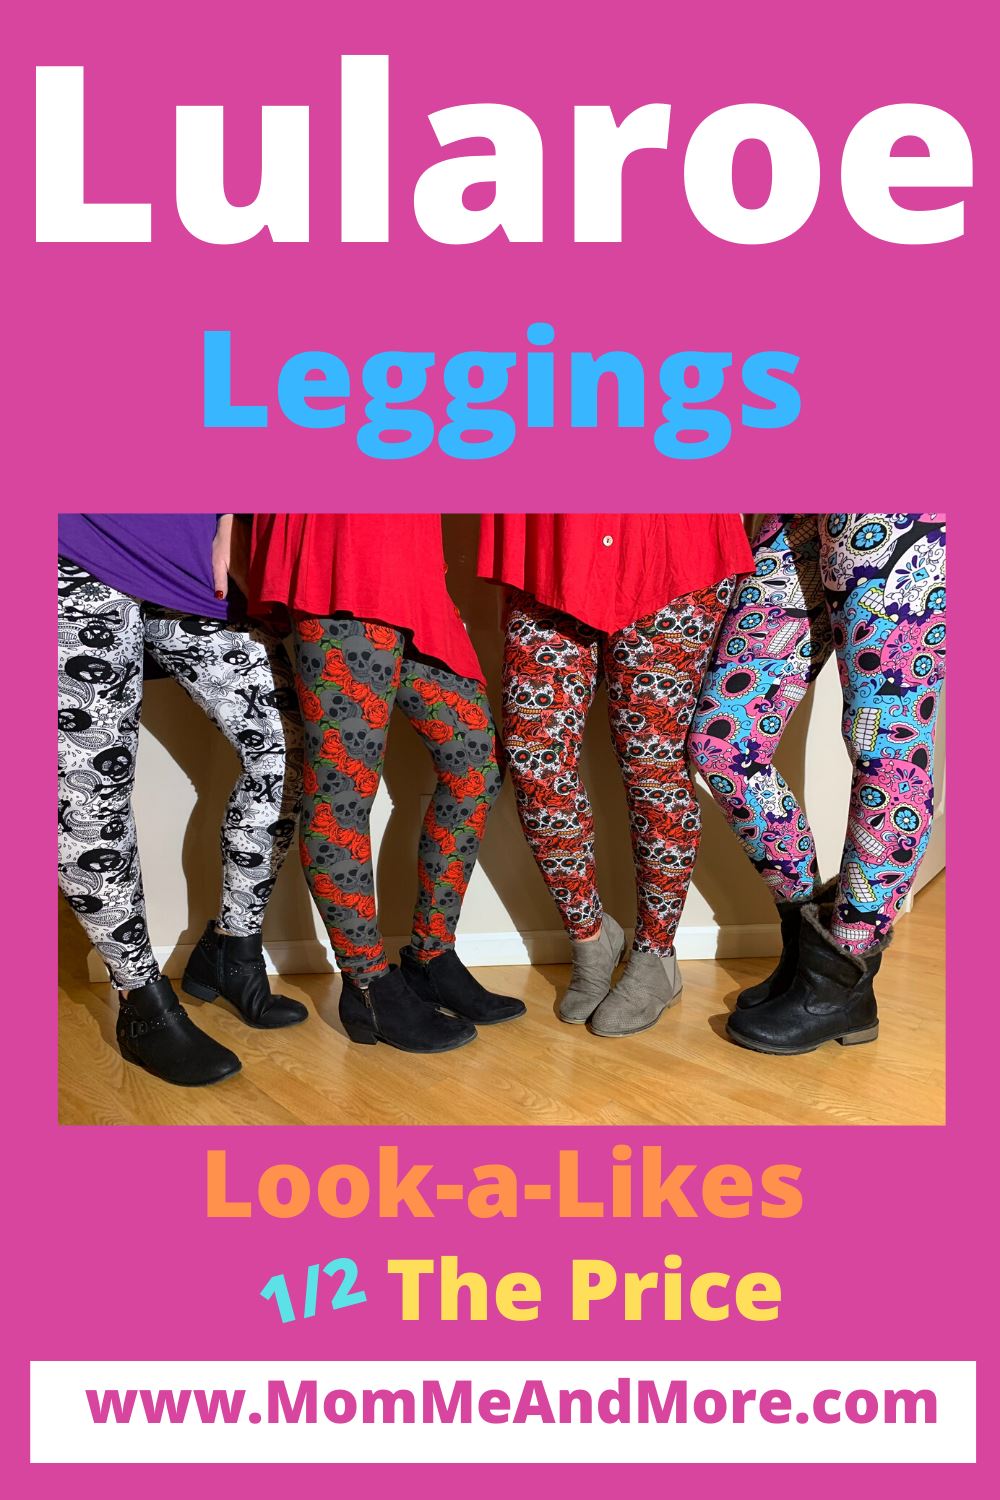 LuLaRoe And A Yoga Studio Story Have A Lot In Common: Locking